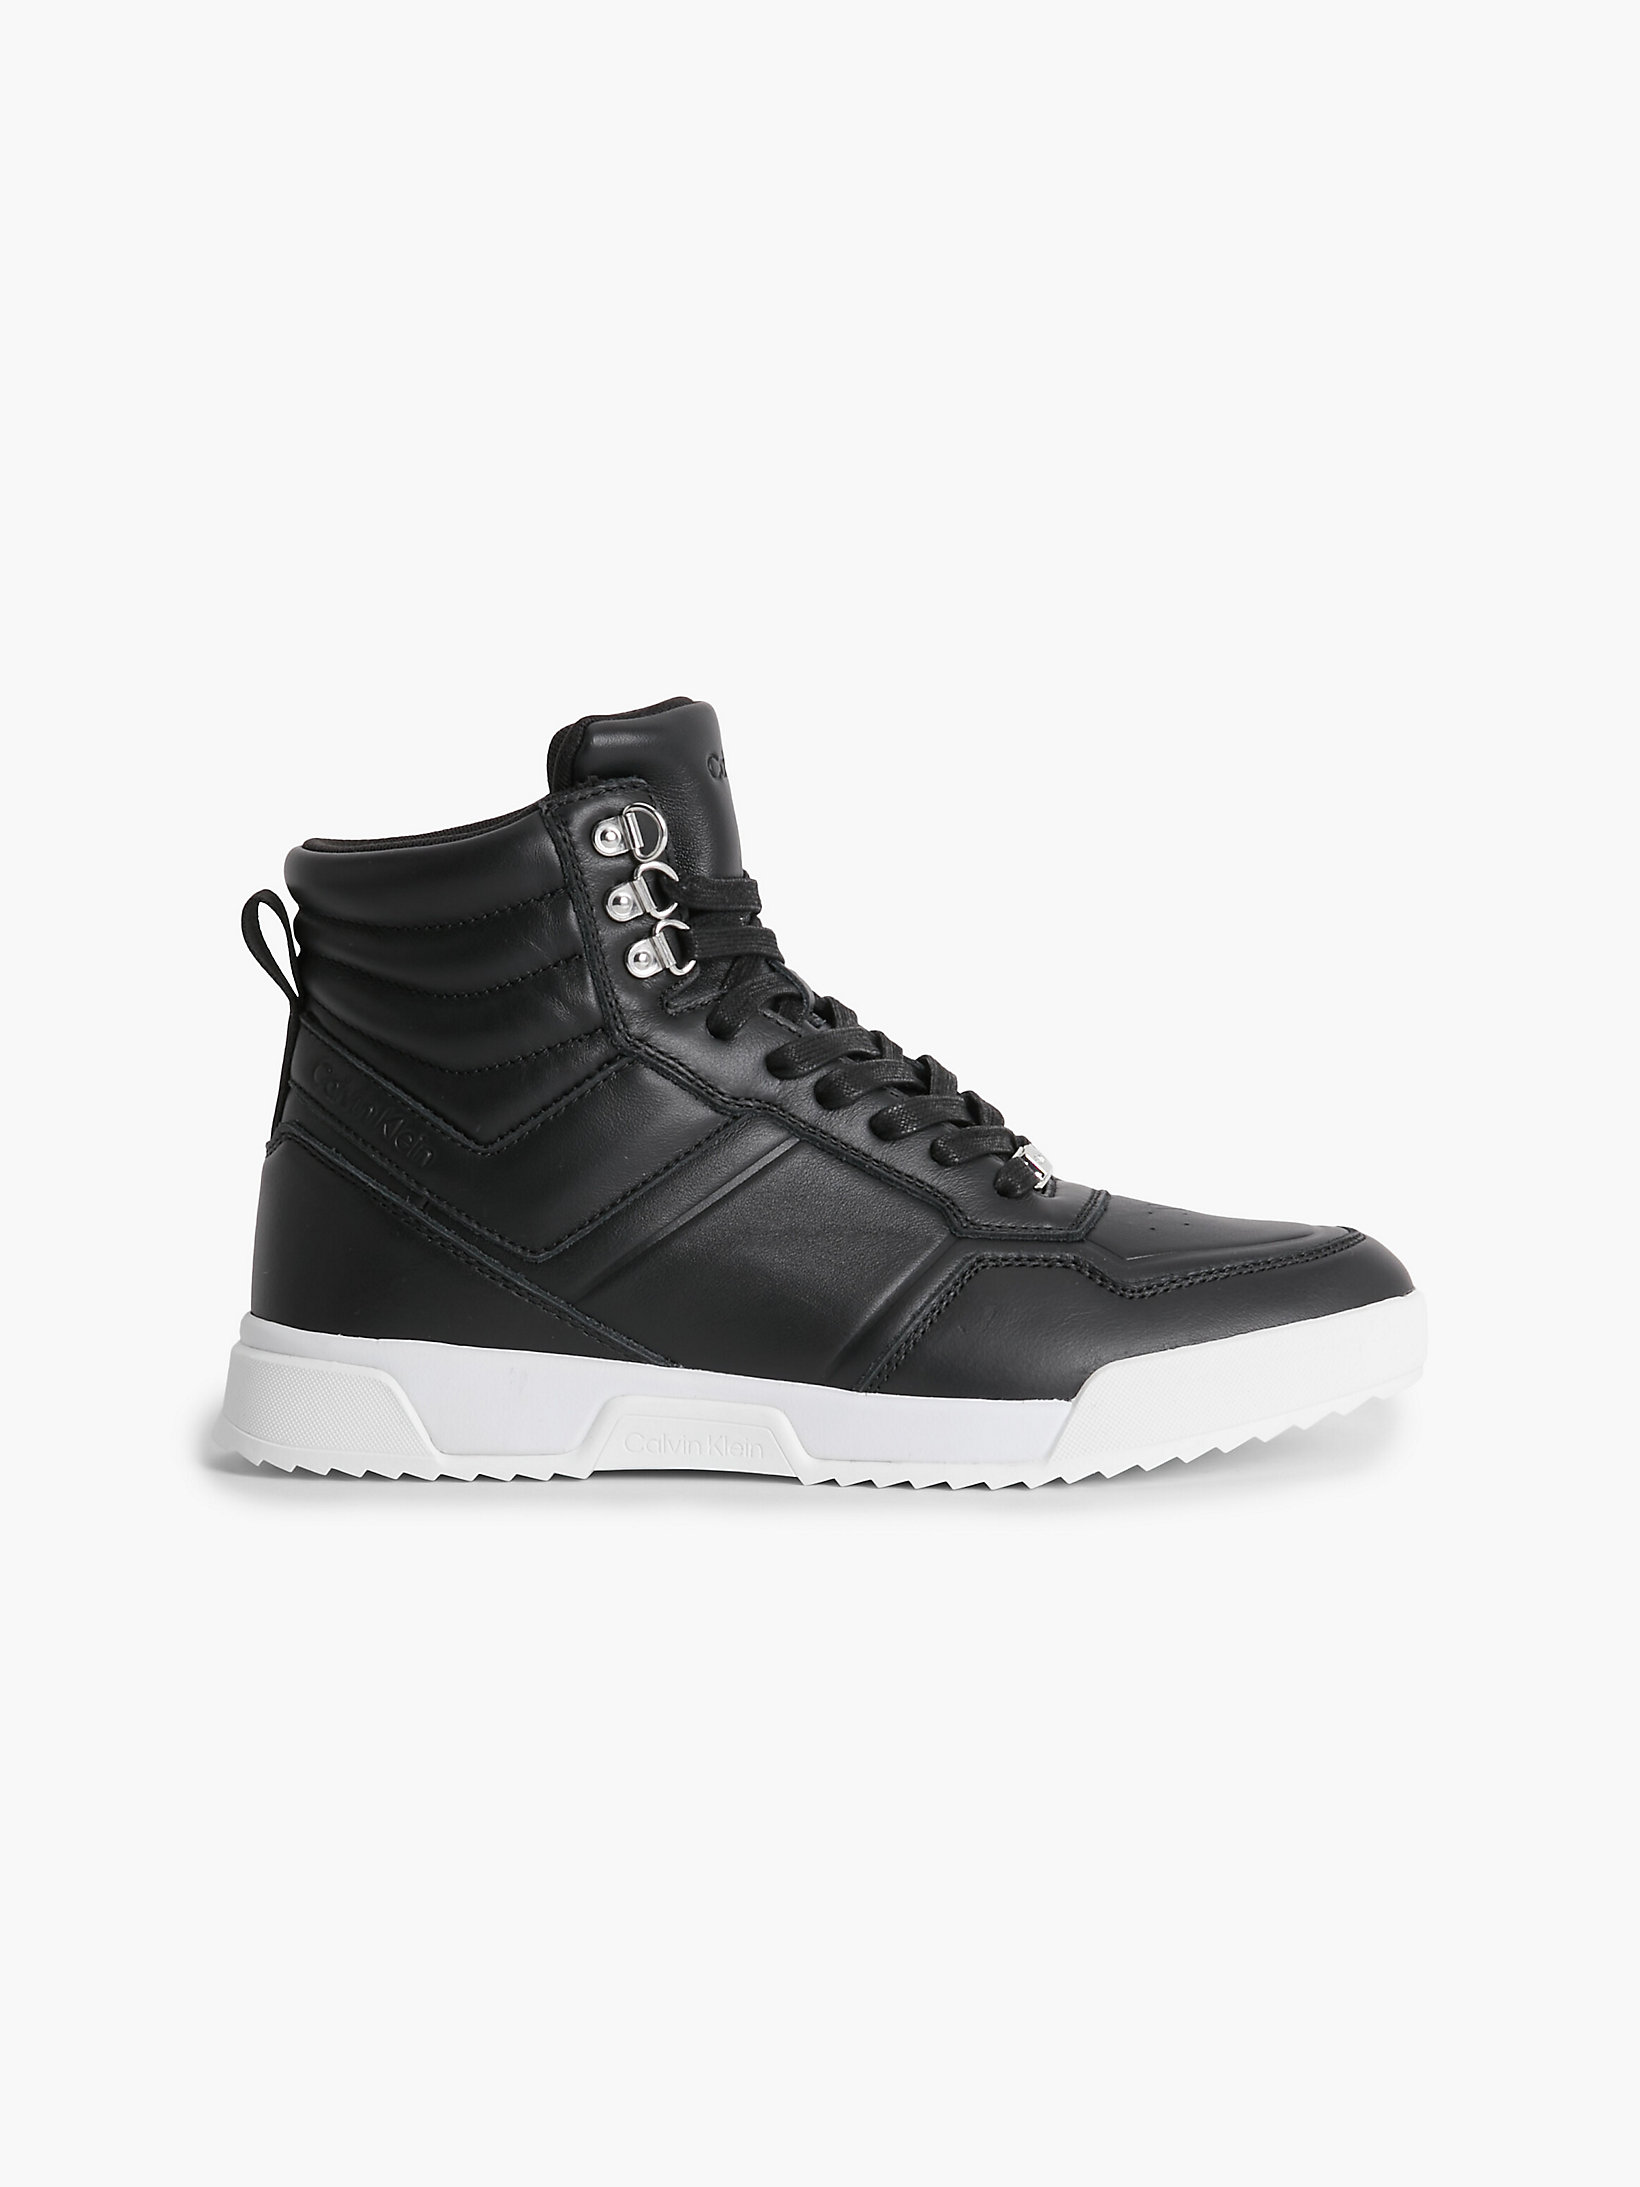 CK Black Leather High-Top Trainers undefined women Calvin Klein